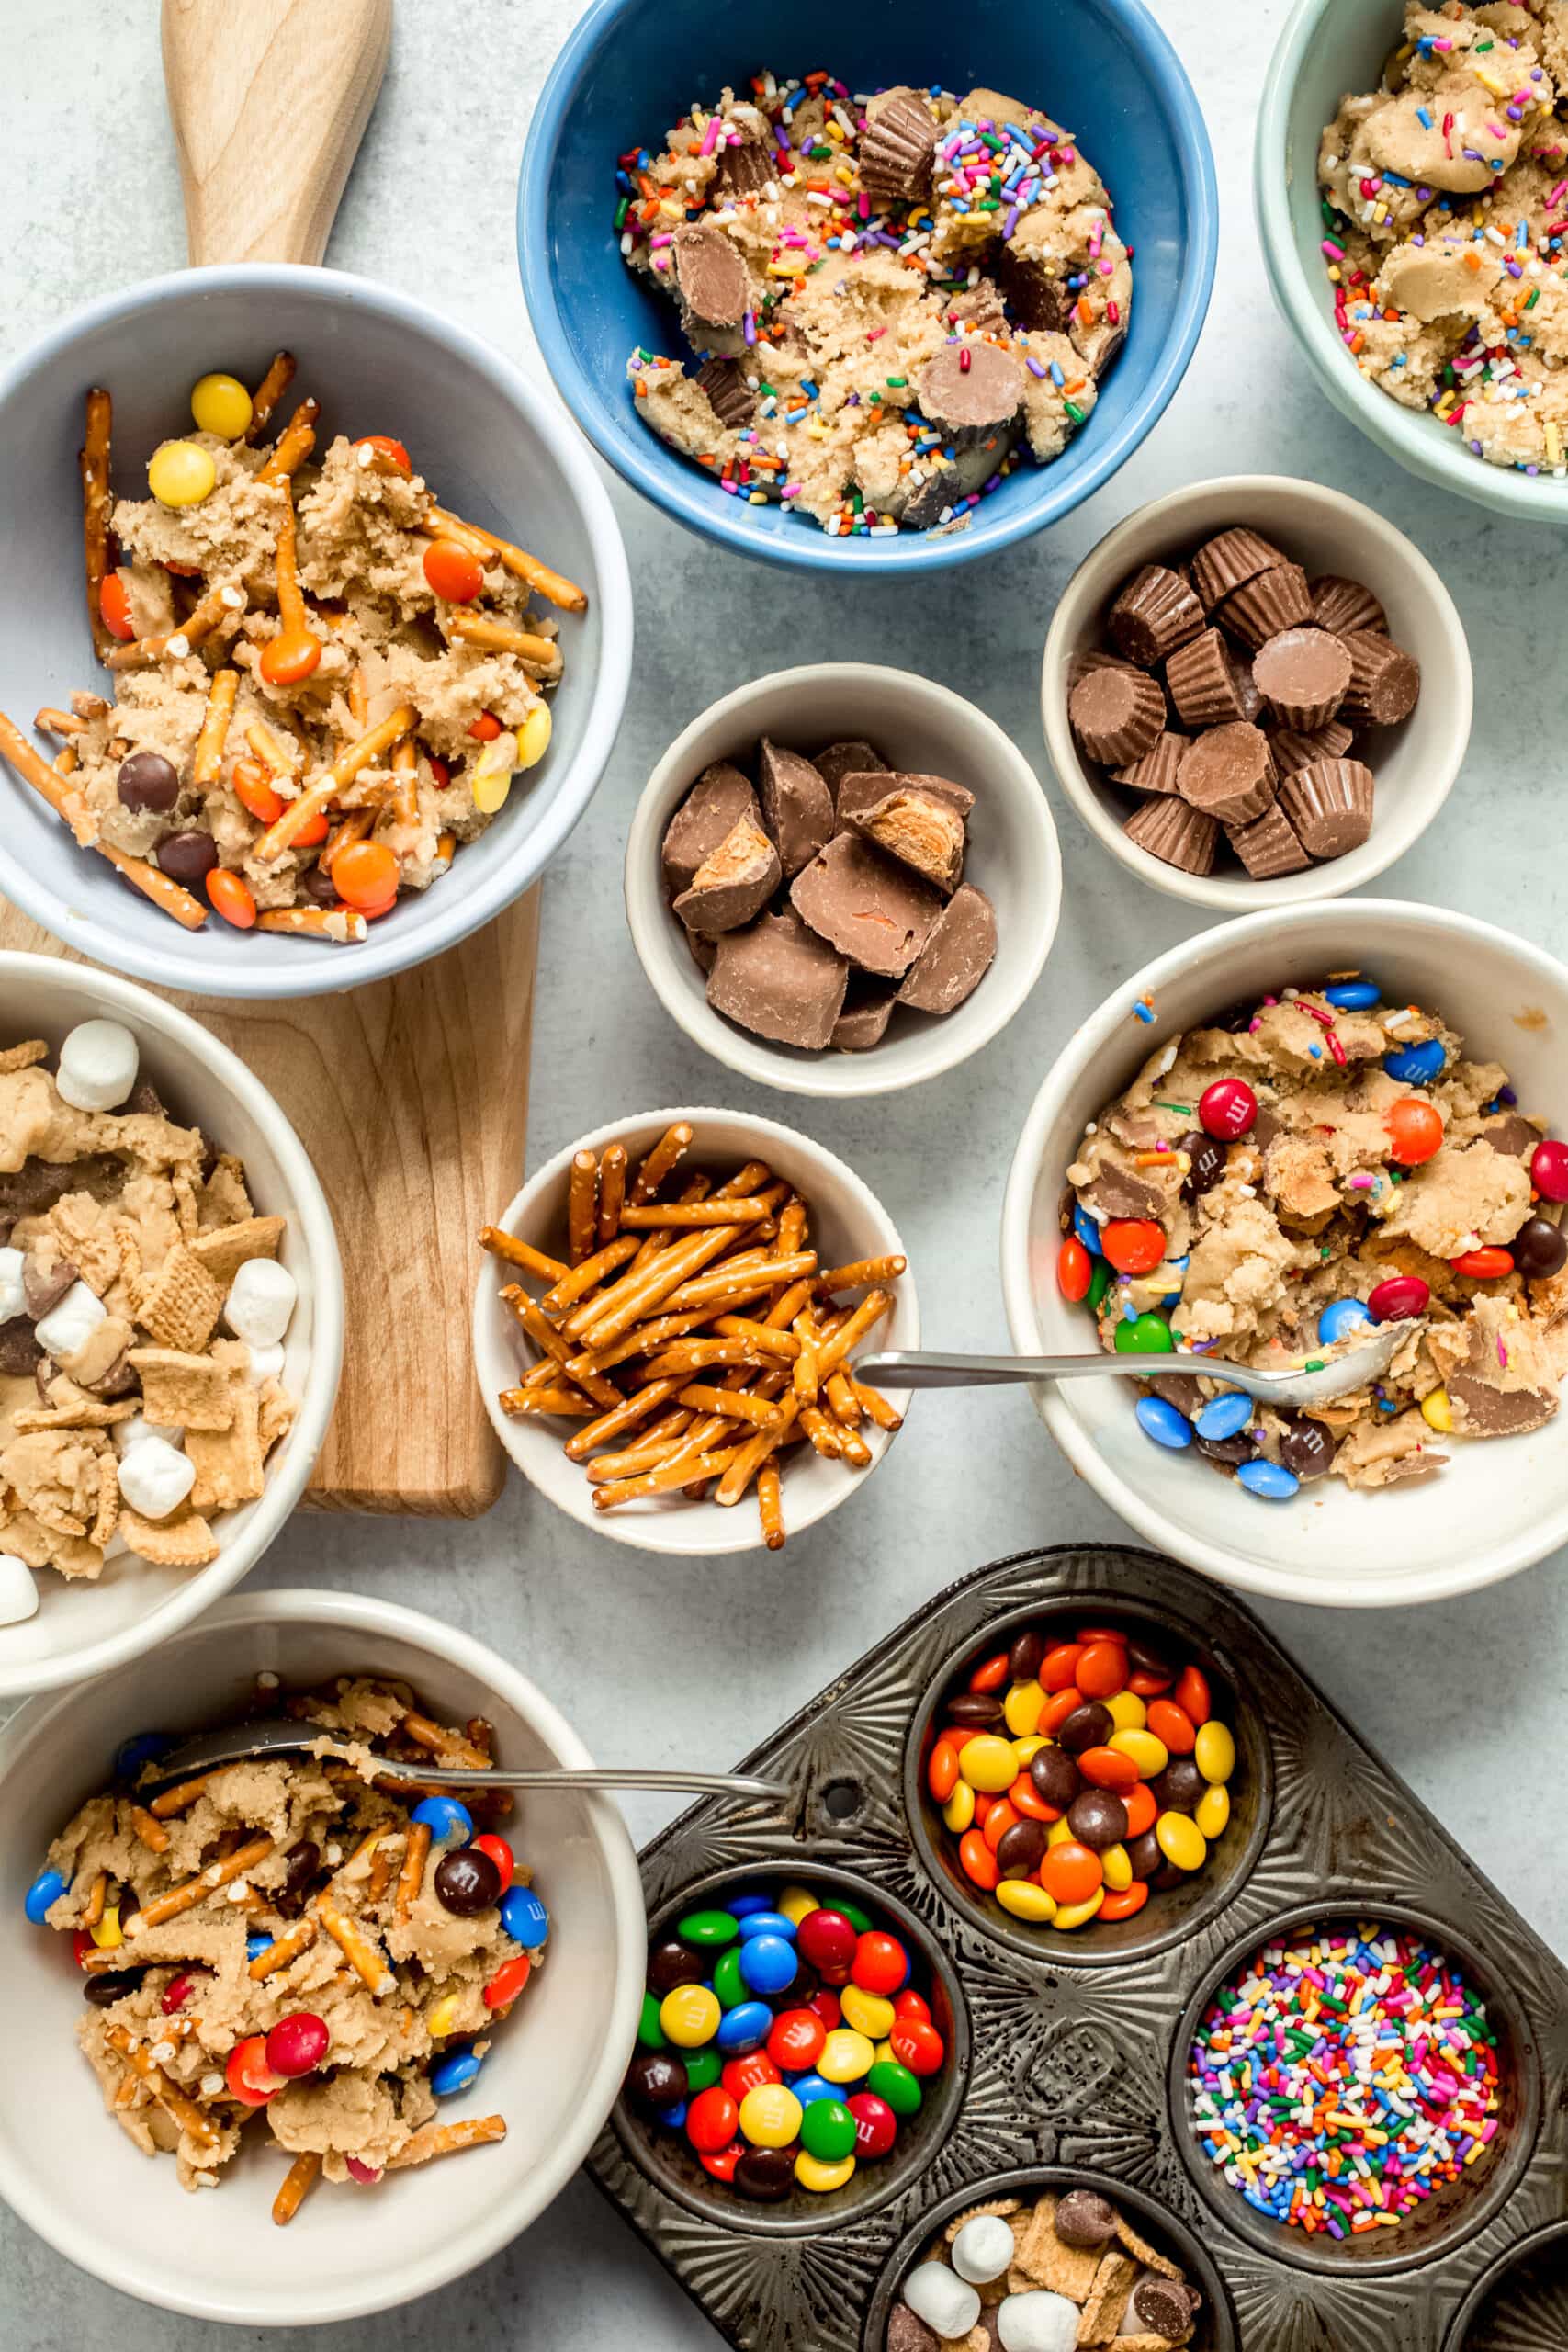 Bowls of mix-ins for cookies